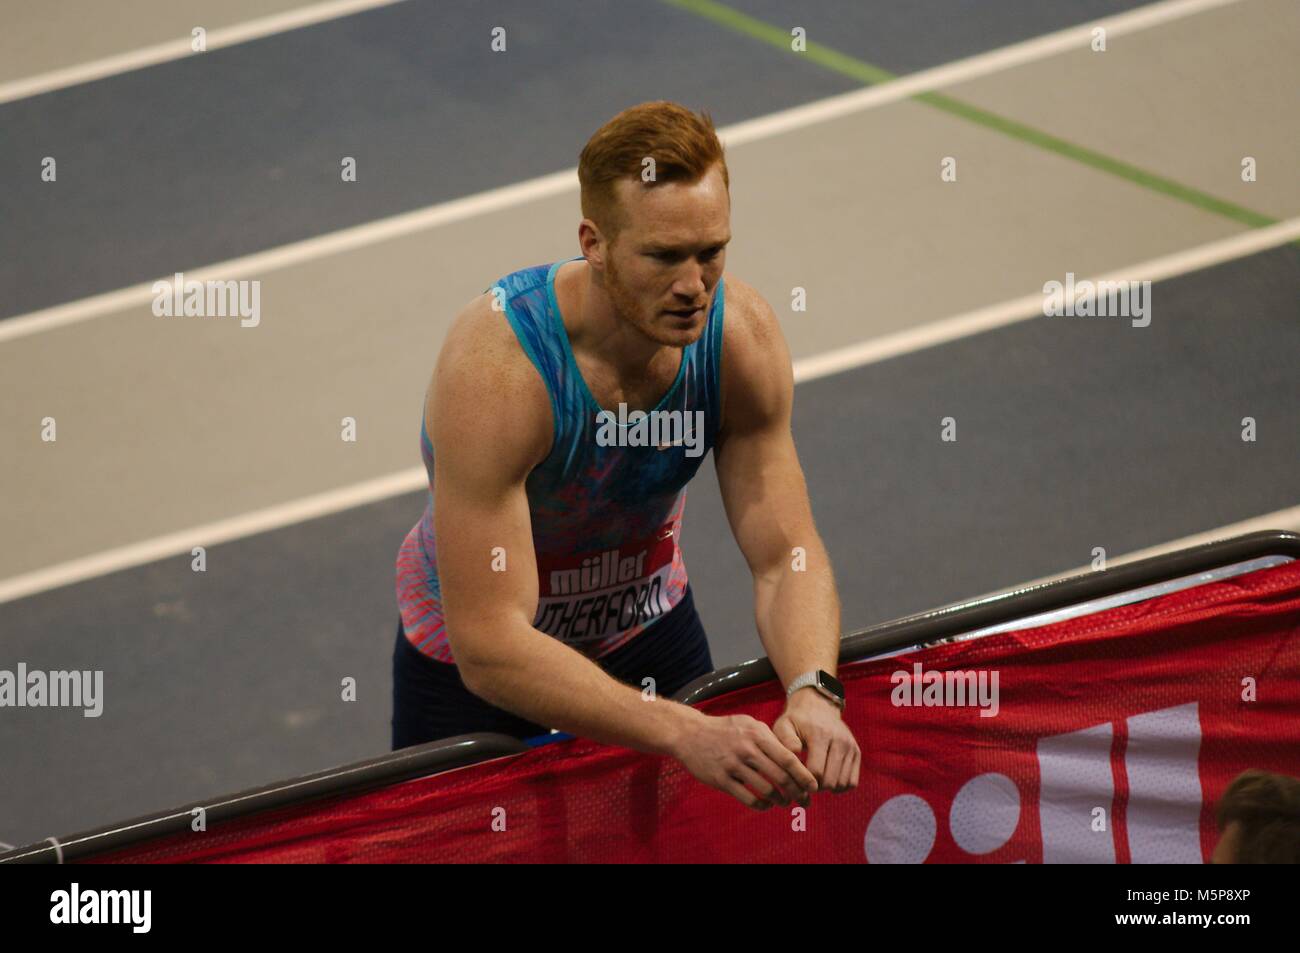 Glasgow, Scotland, 25 February 2018. Greg Rutherford talking to his coach during the long jump at the Muller Indoor Grand Prix in Glasgow.  Credit: Colin Edwards/Alamy Live News. Stock Photo